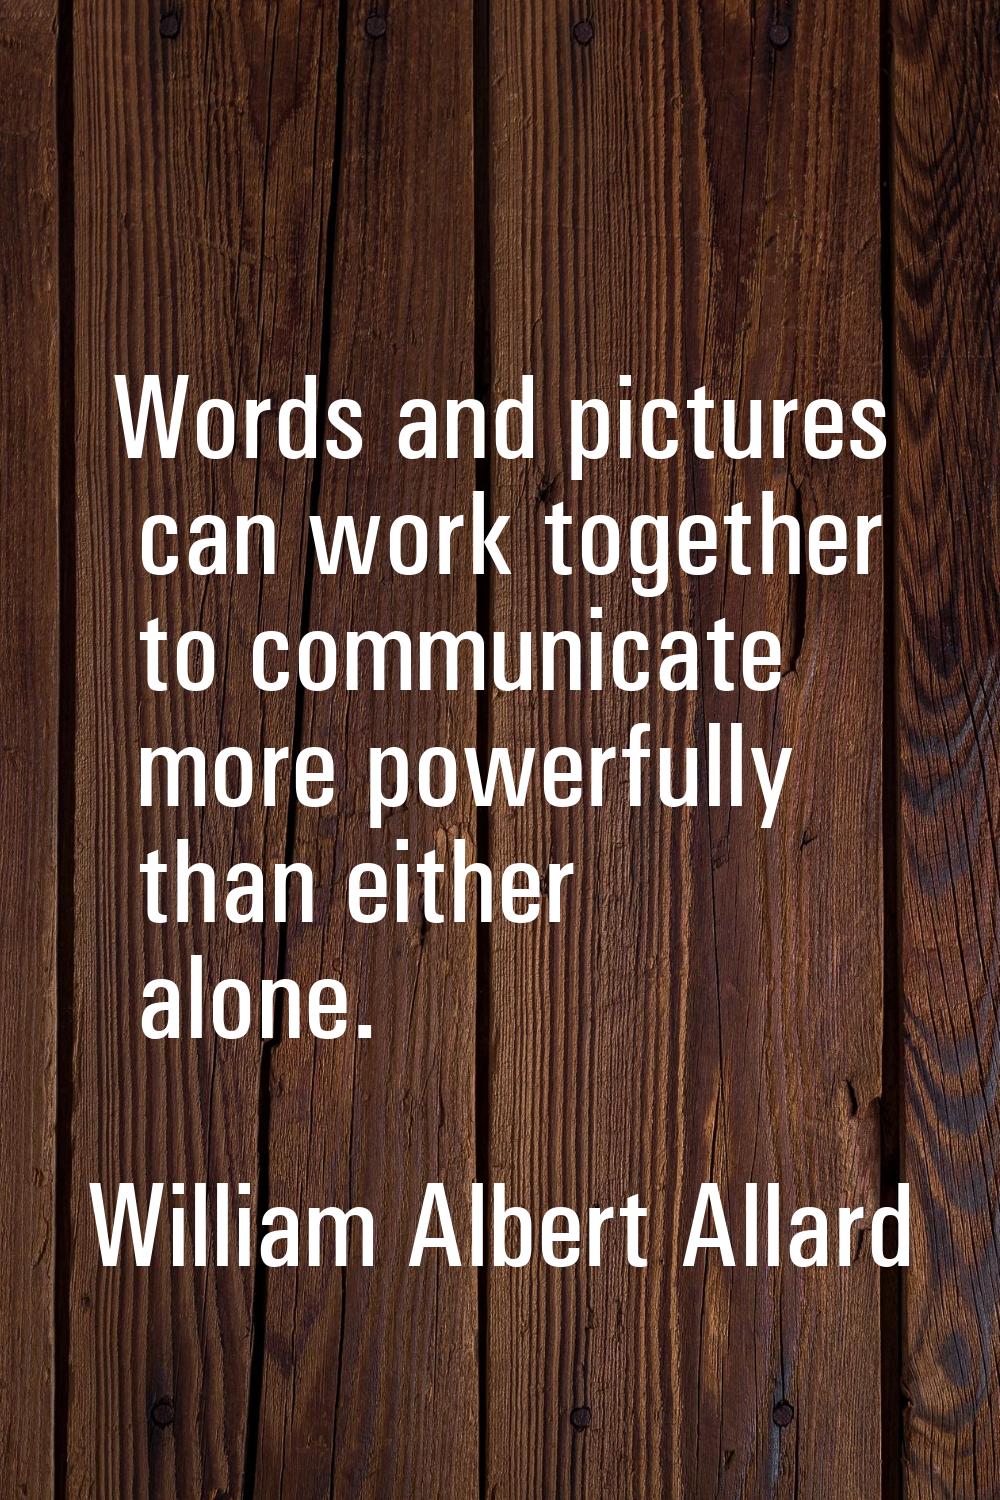 Words and pictures can work together to communicate more powerfully than either alone.